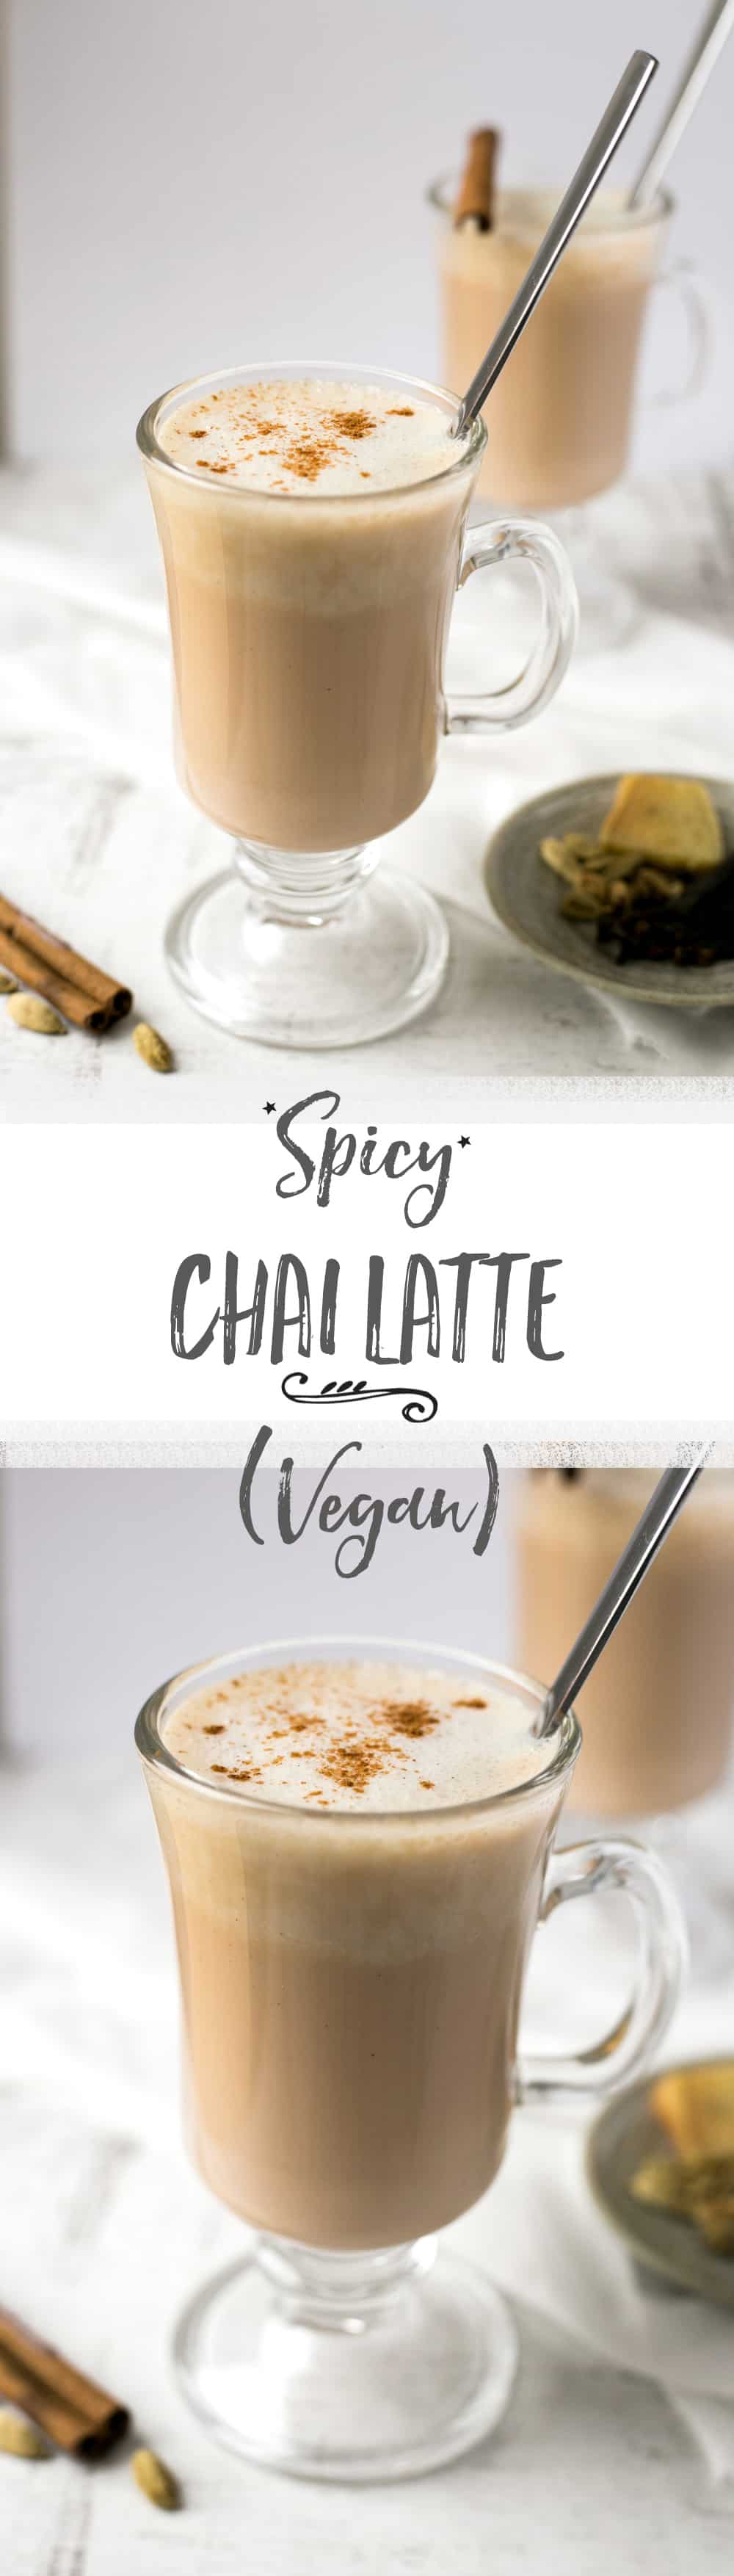 Smooth, delicious, spicy chai latte made with cashew milk and traditional spices. | via @annabanana.co